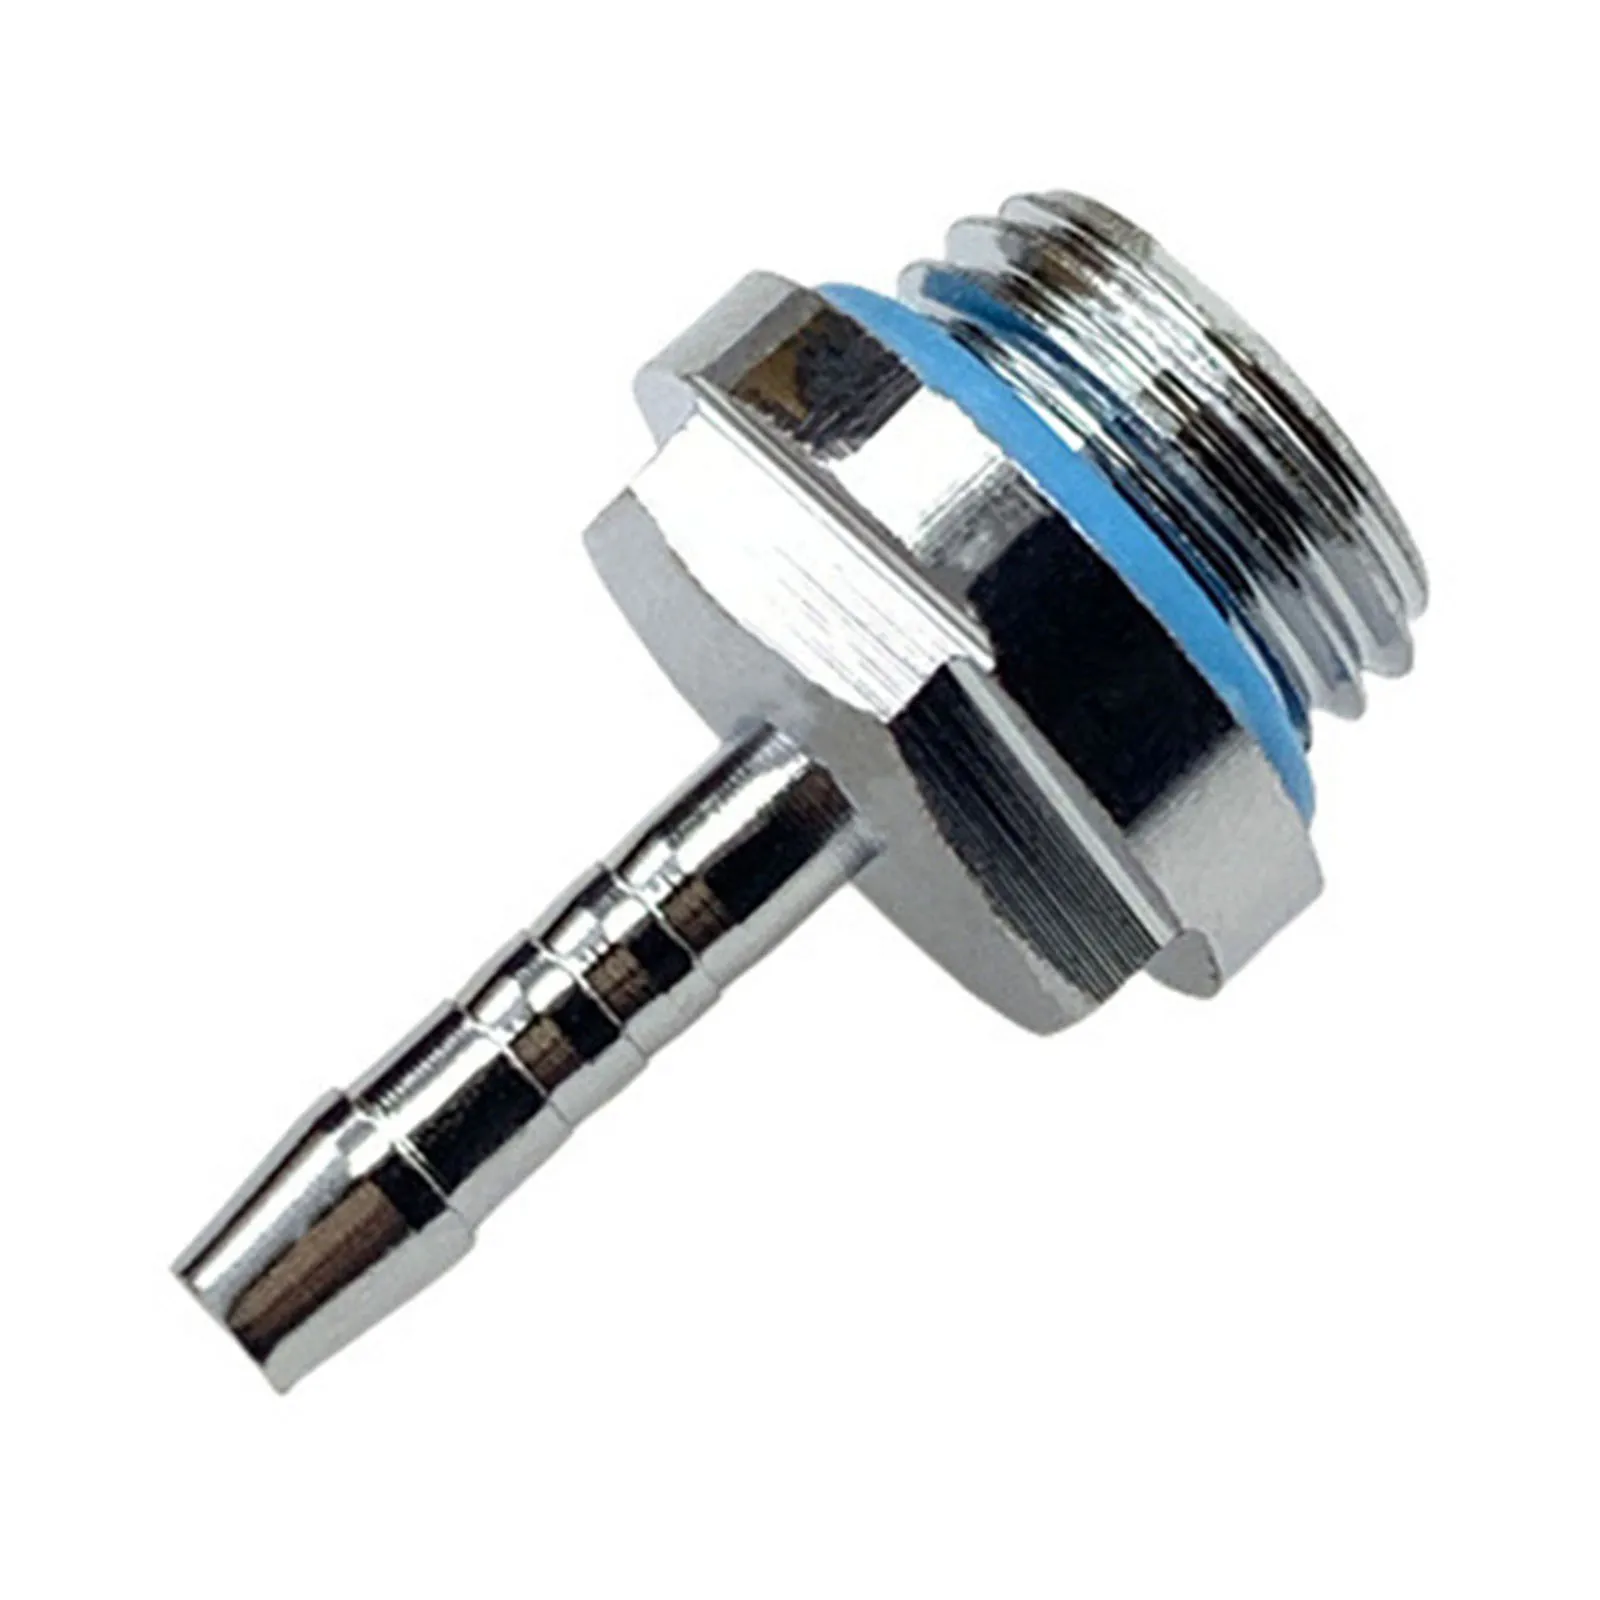 

Barb Connector Hose Pagoda Fitting Inside Chamfer Silver Waterproof Wrench Hex Brass Chrome Plated G1/4 Thread